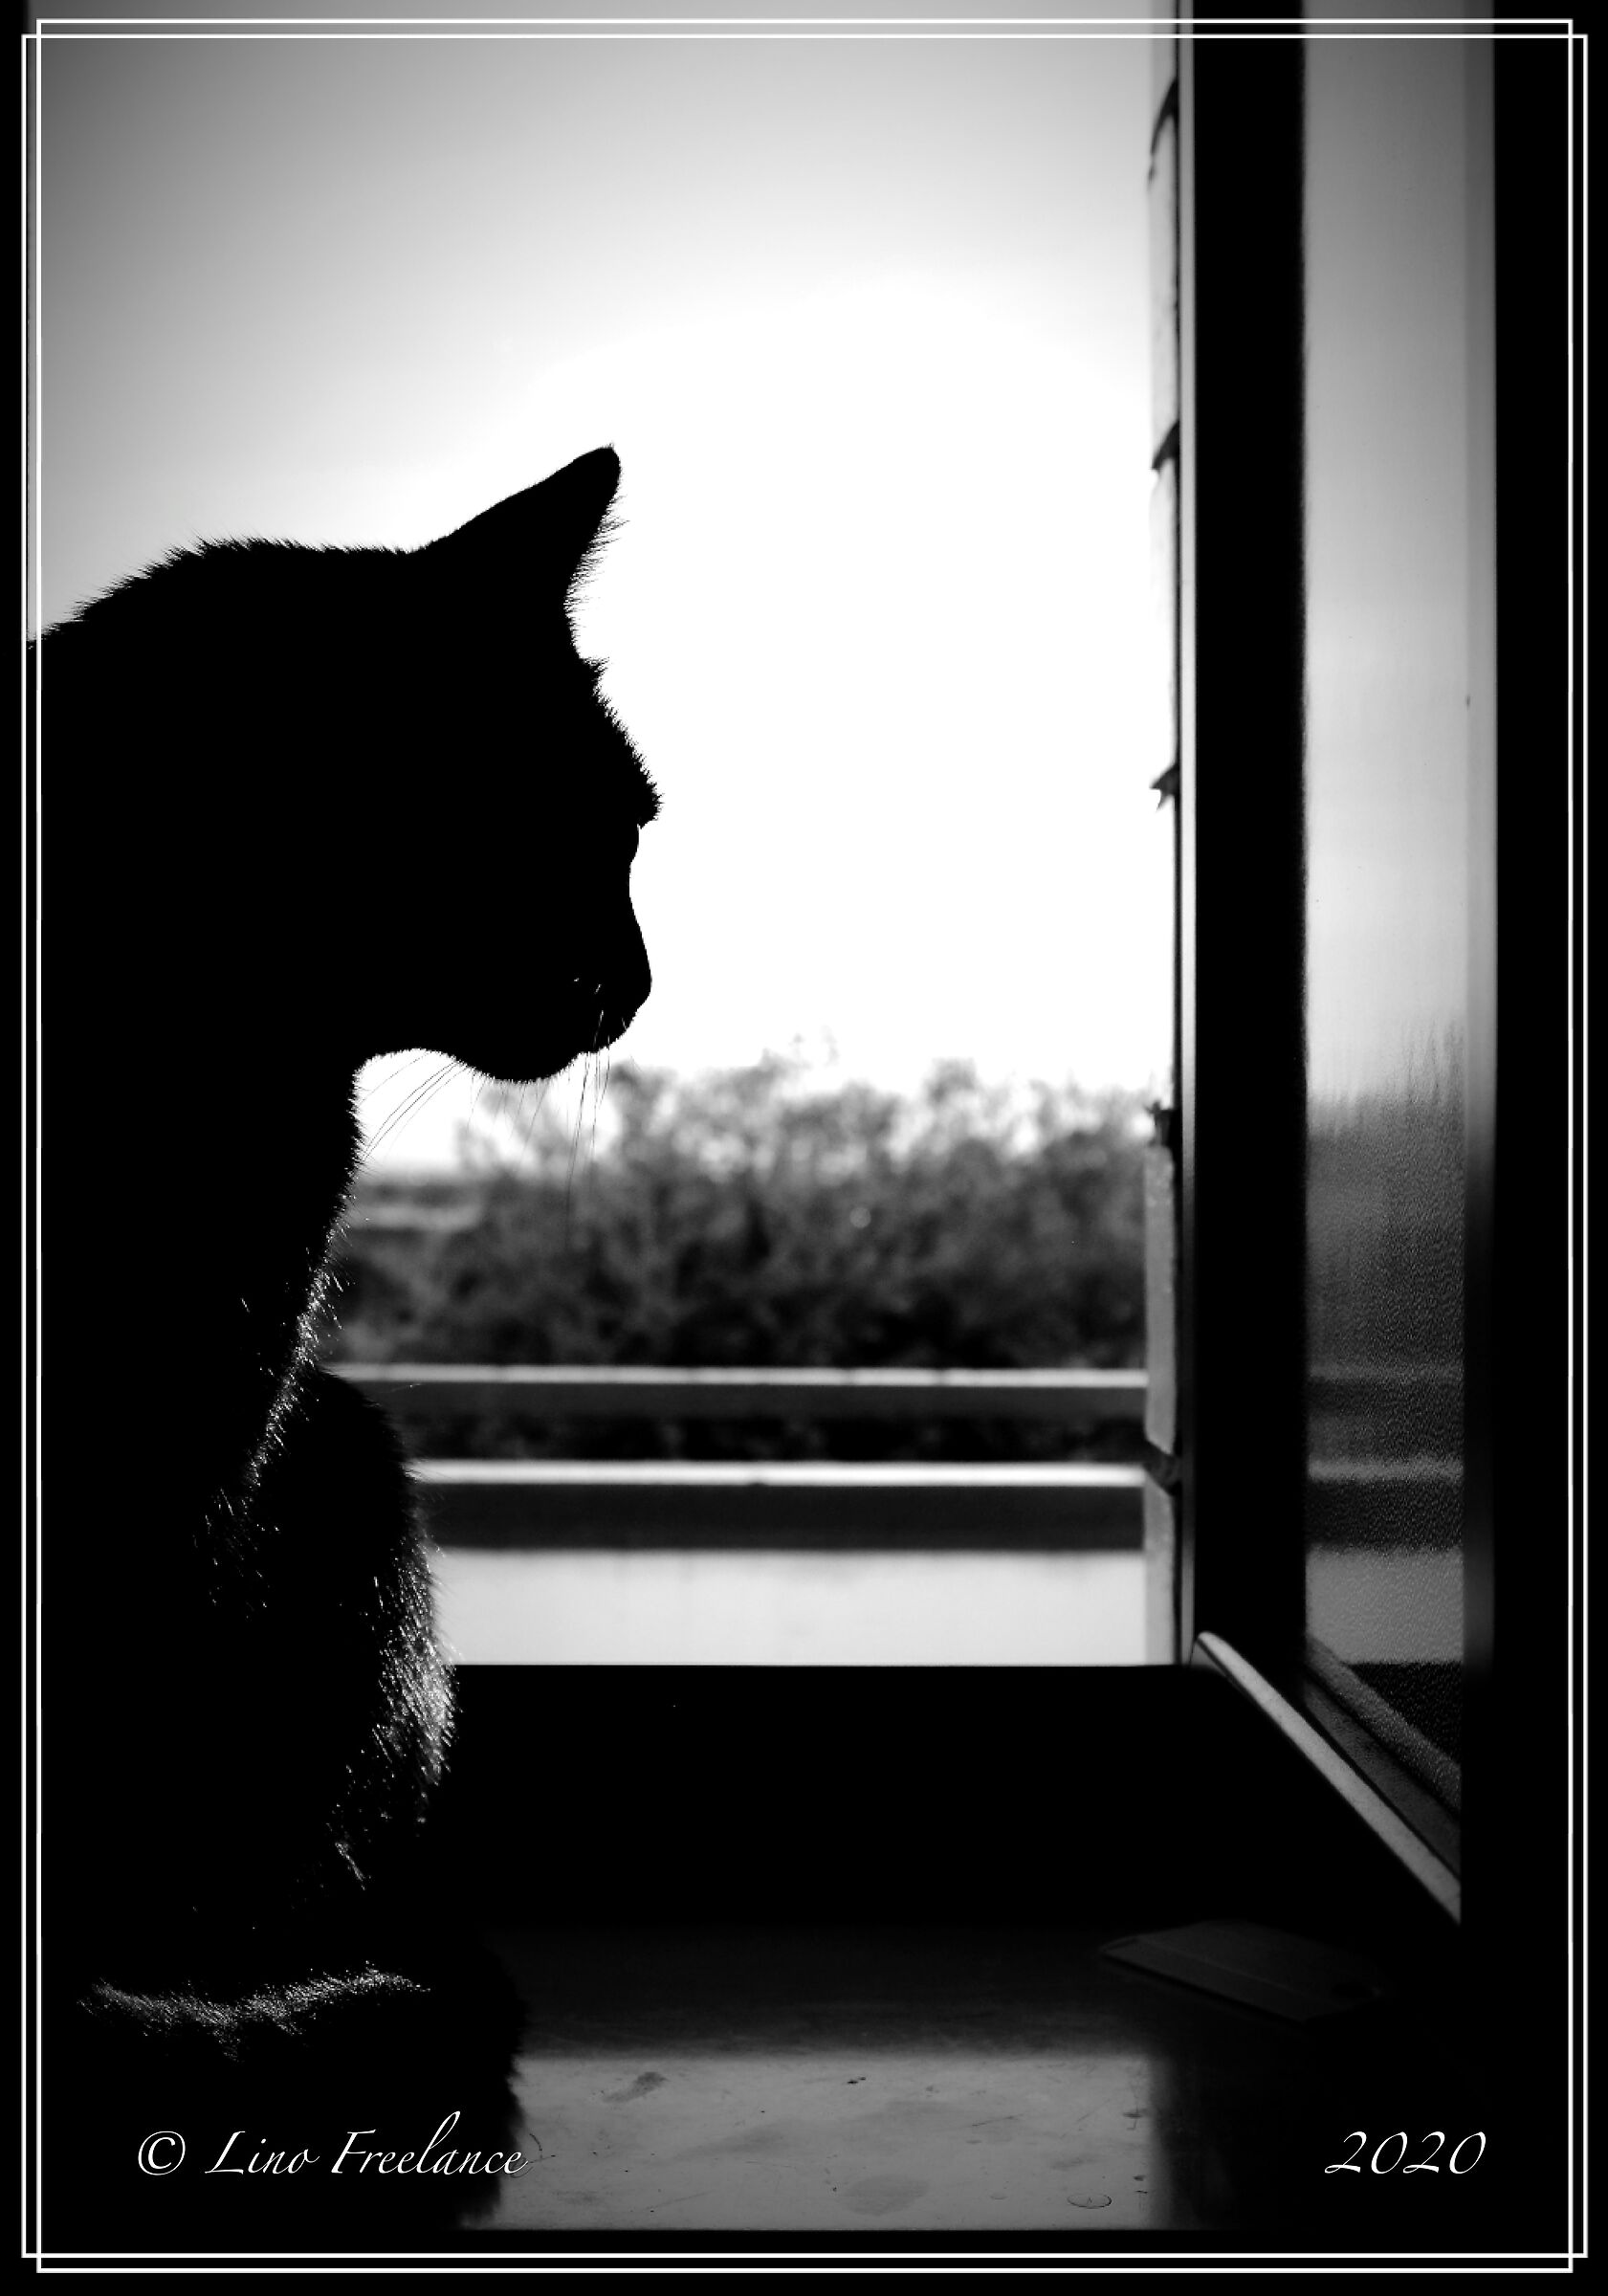 At the window waiting for some guests......